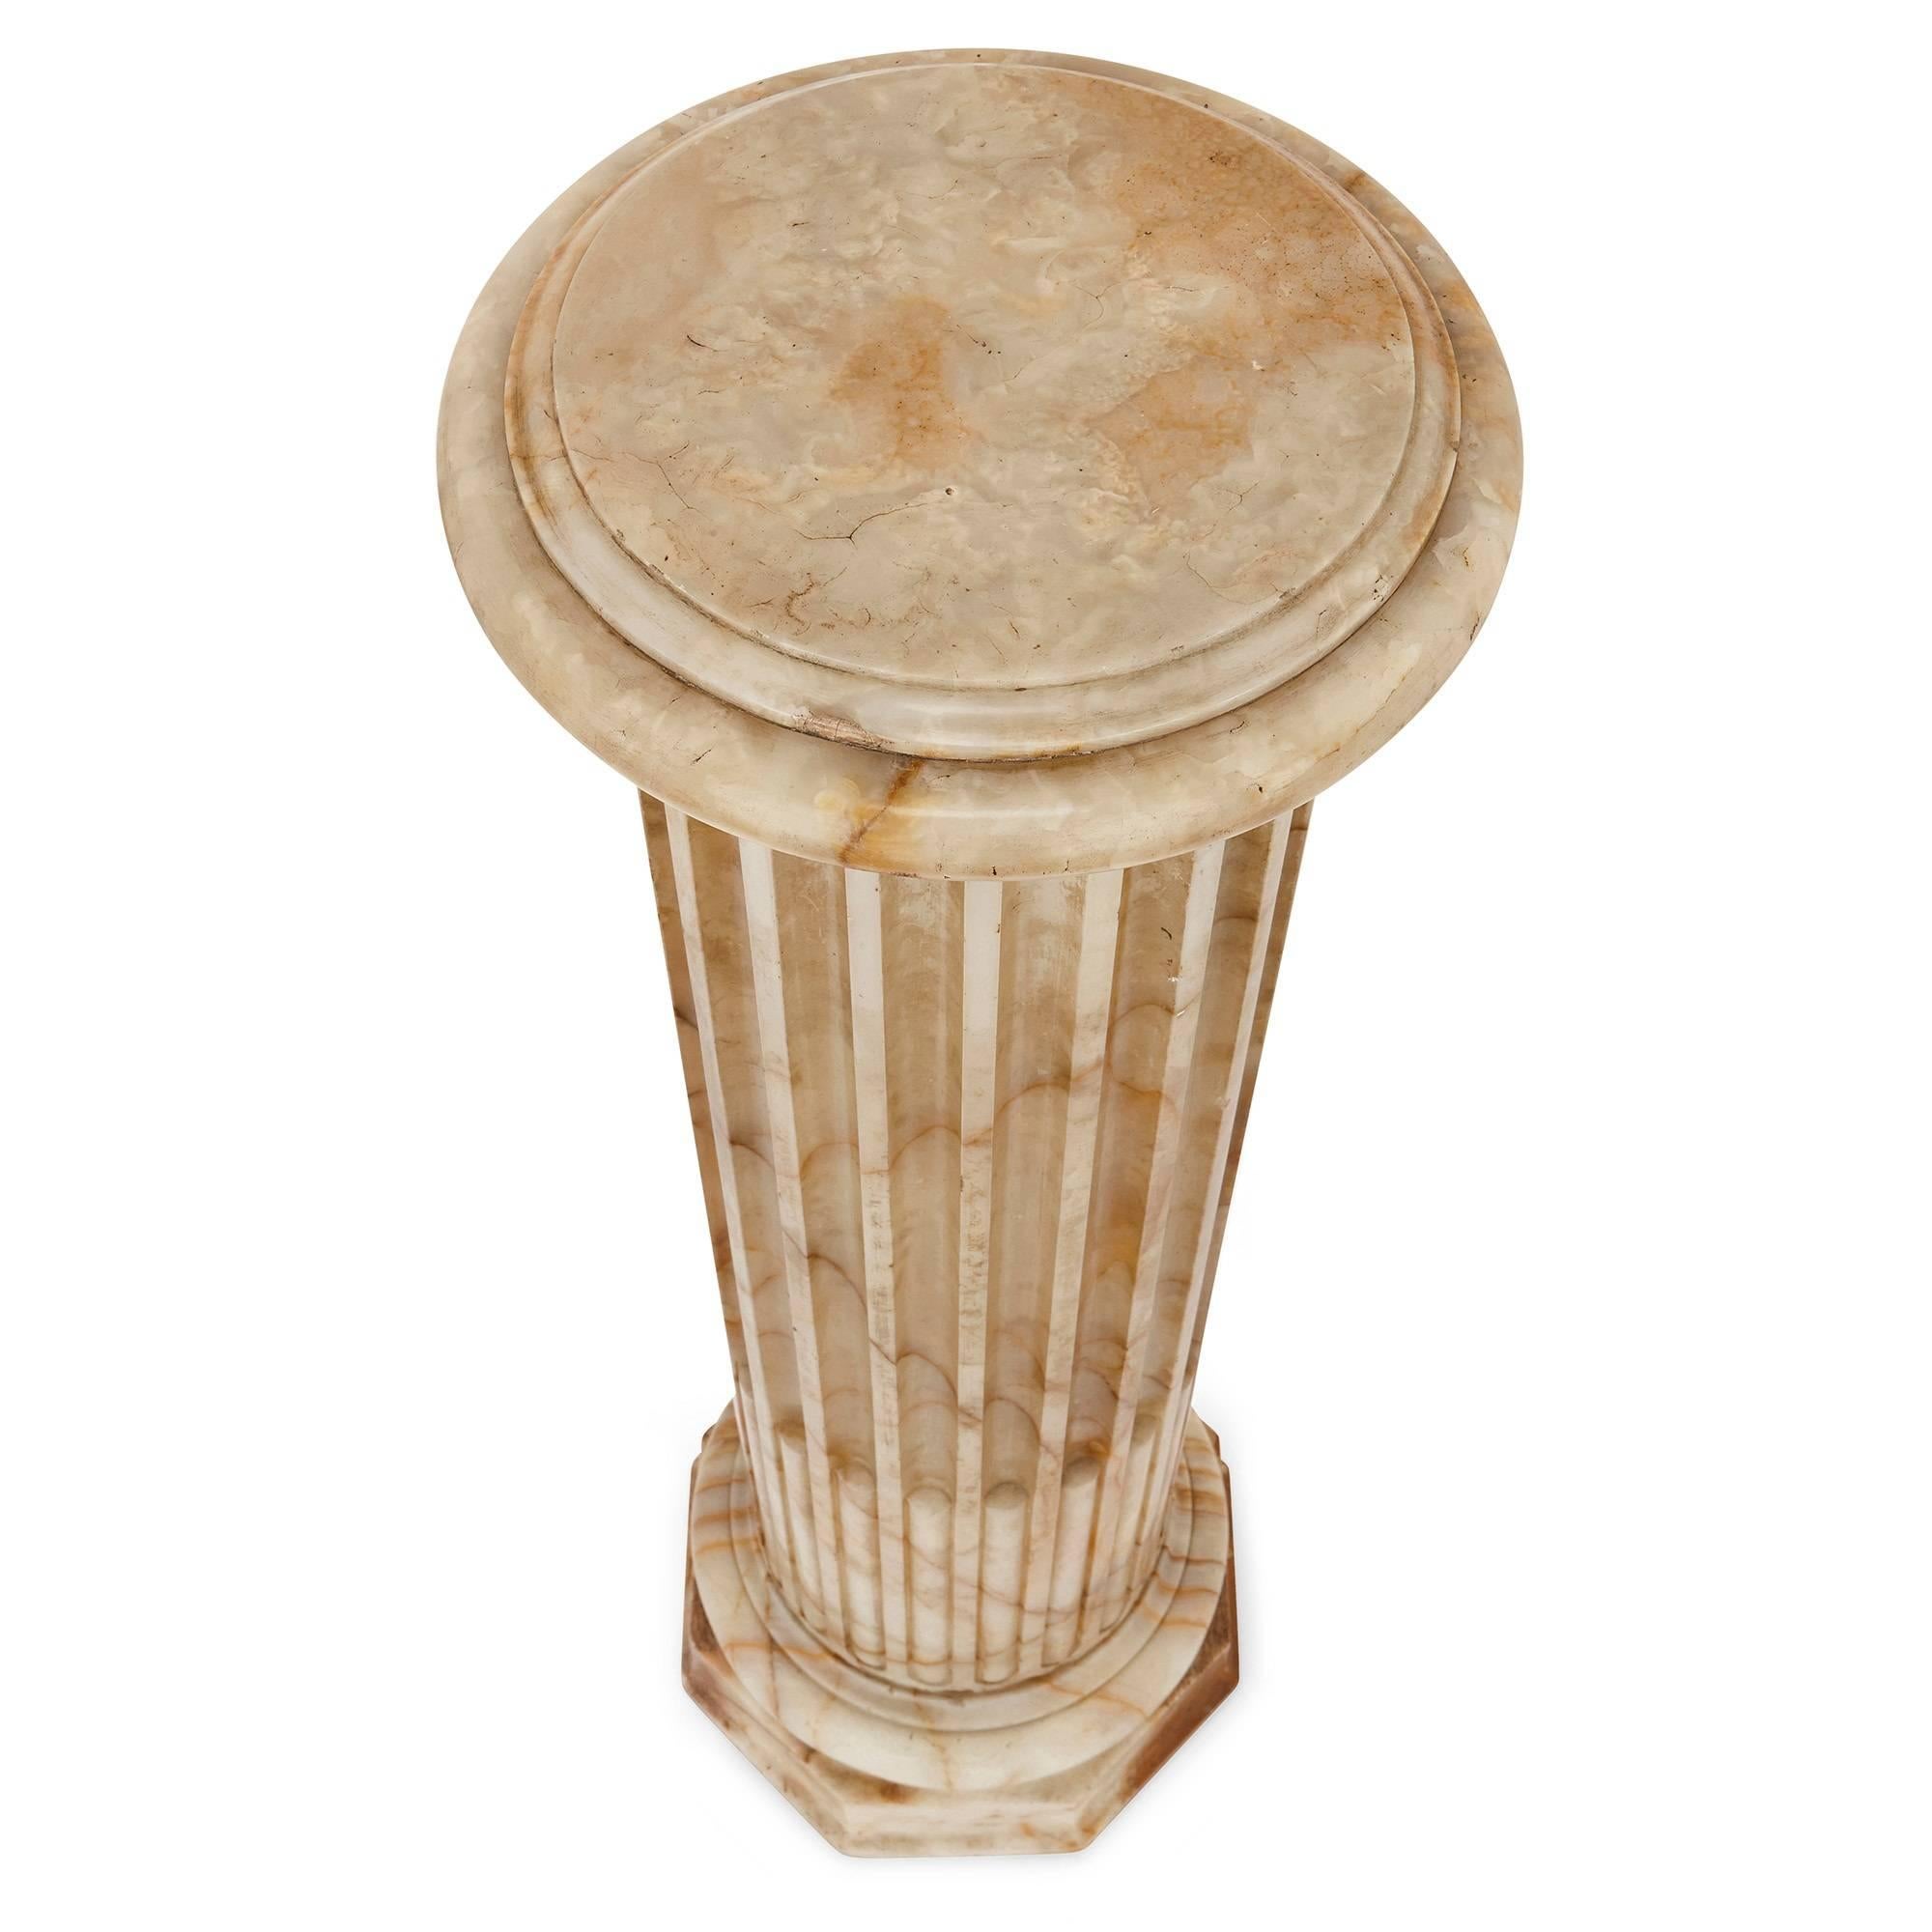 Made at the height of the vogue for neoclassical design in the 19th century, these pedestals will make a fine addition to a classical interior setting. These are Doric order columns, built from the cream-colored mineral alabaster. The lower half of